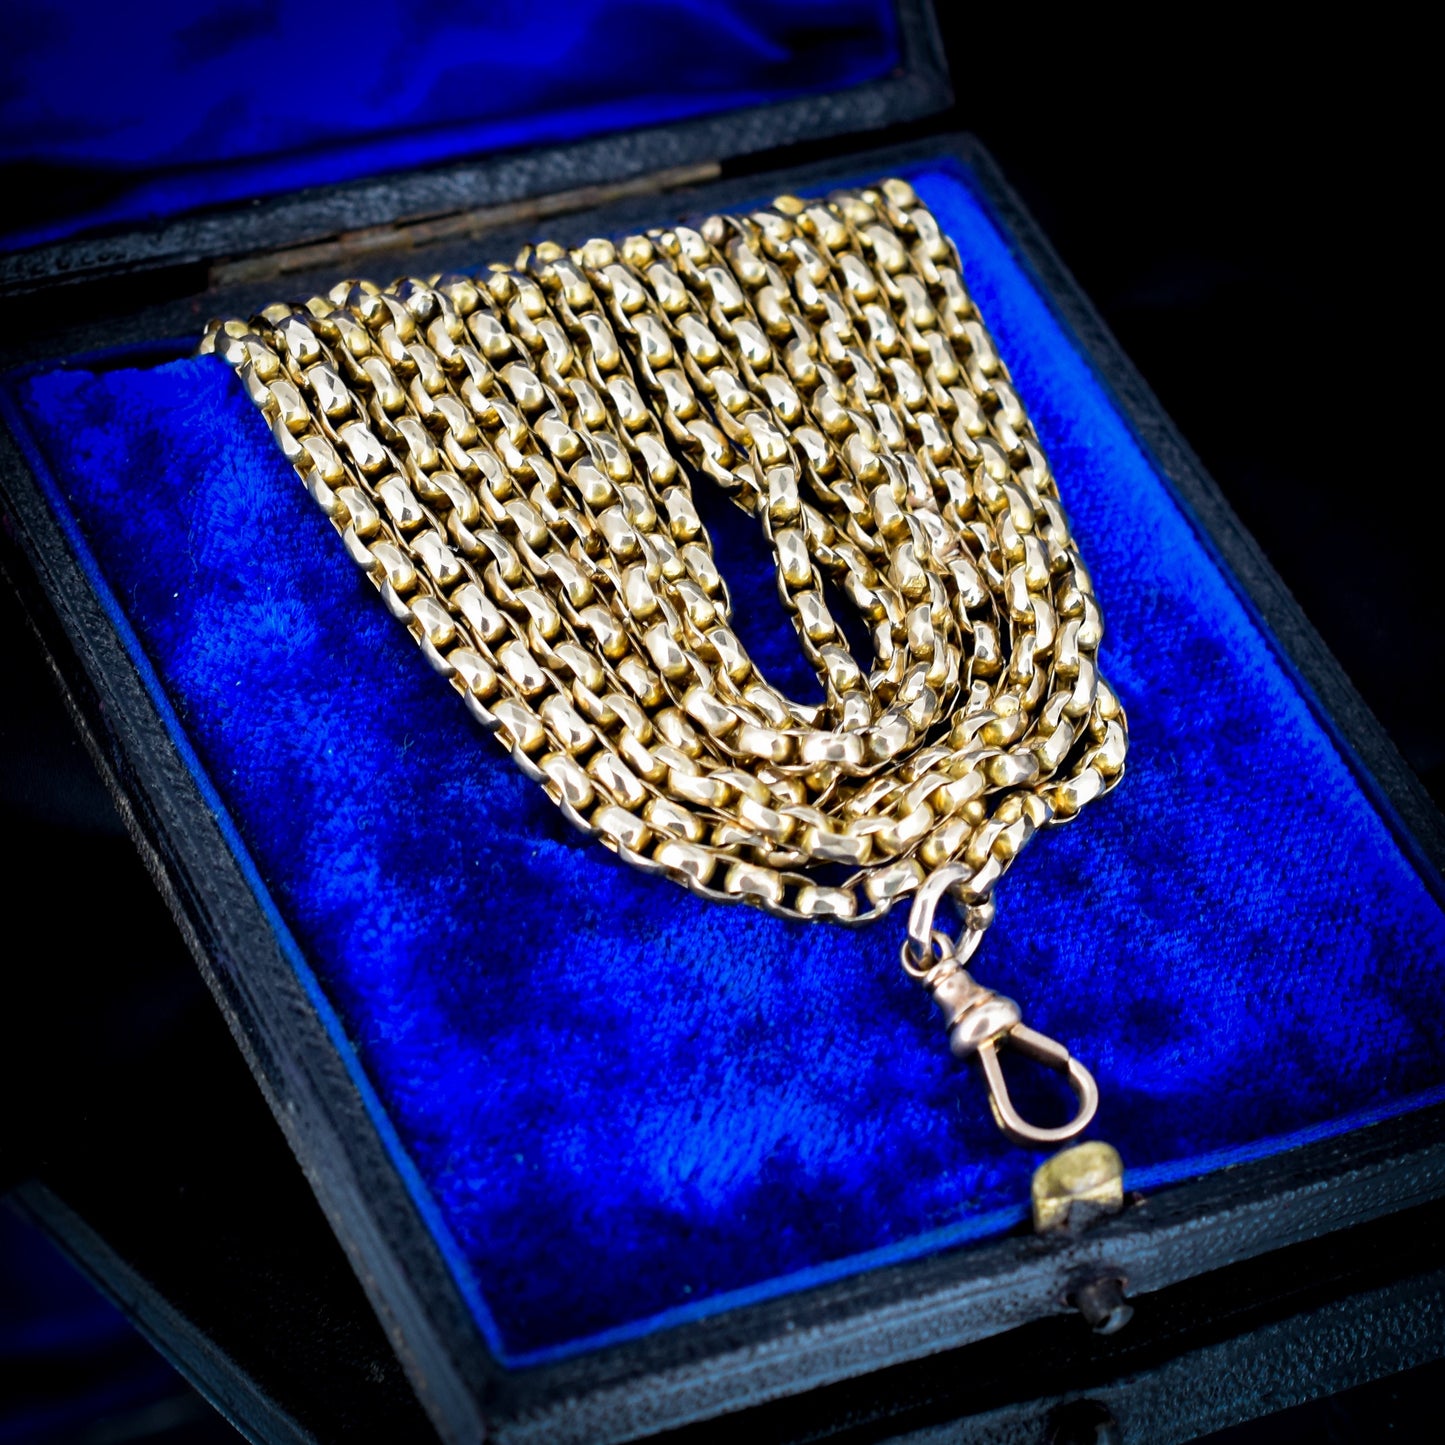 Antique Victorian 9ct Gold Long Guard Chain Necklace (47.2g)